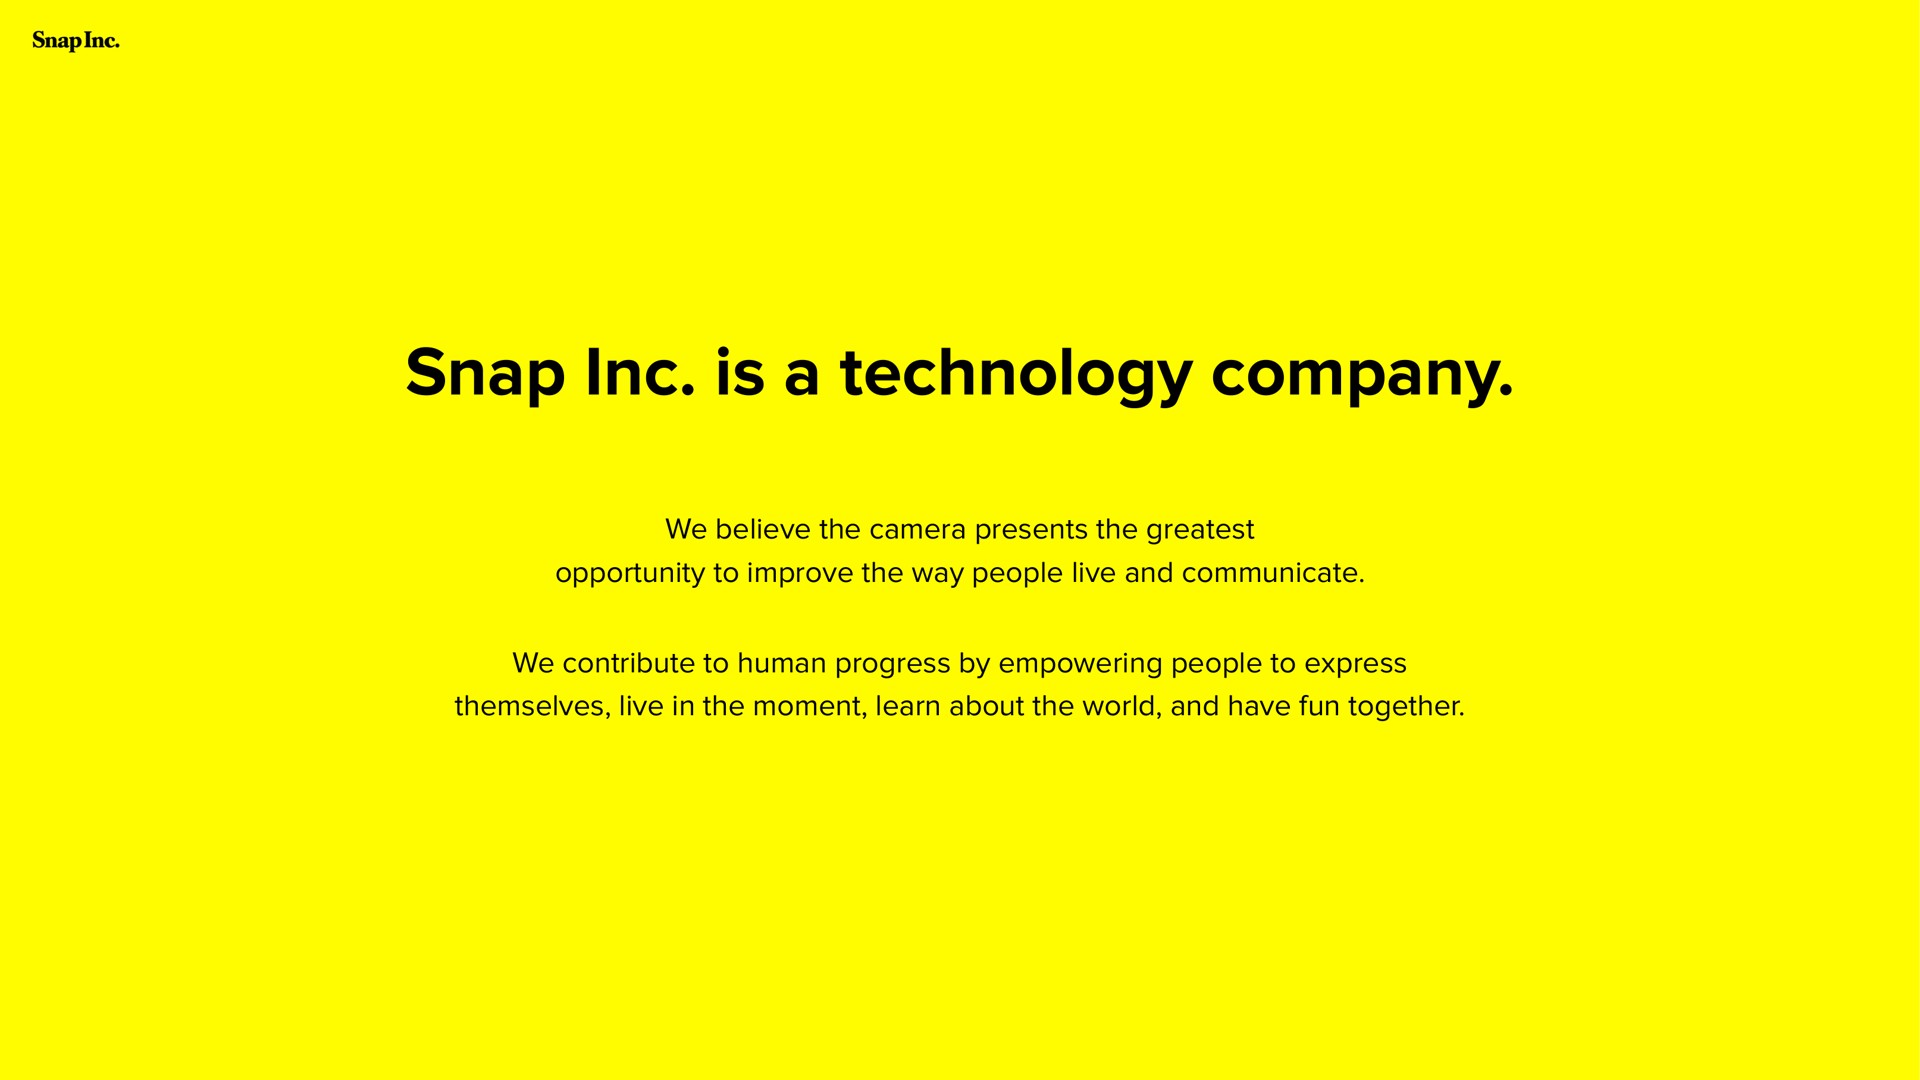 snap is a technology company | Snap Inc